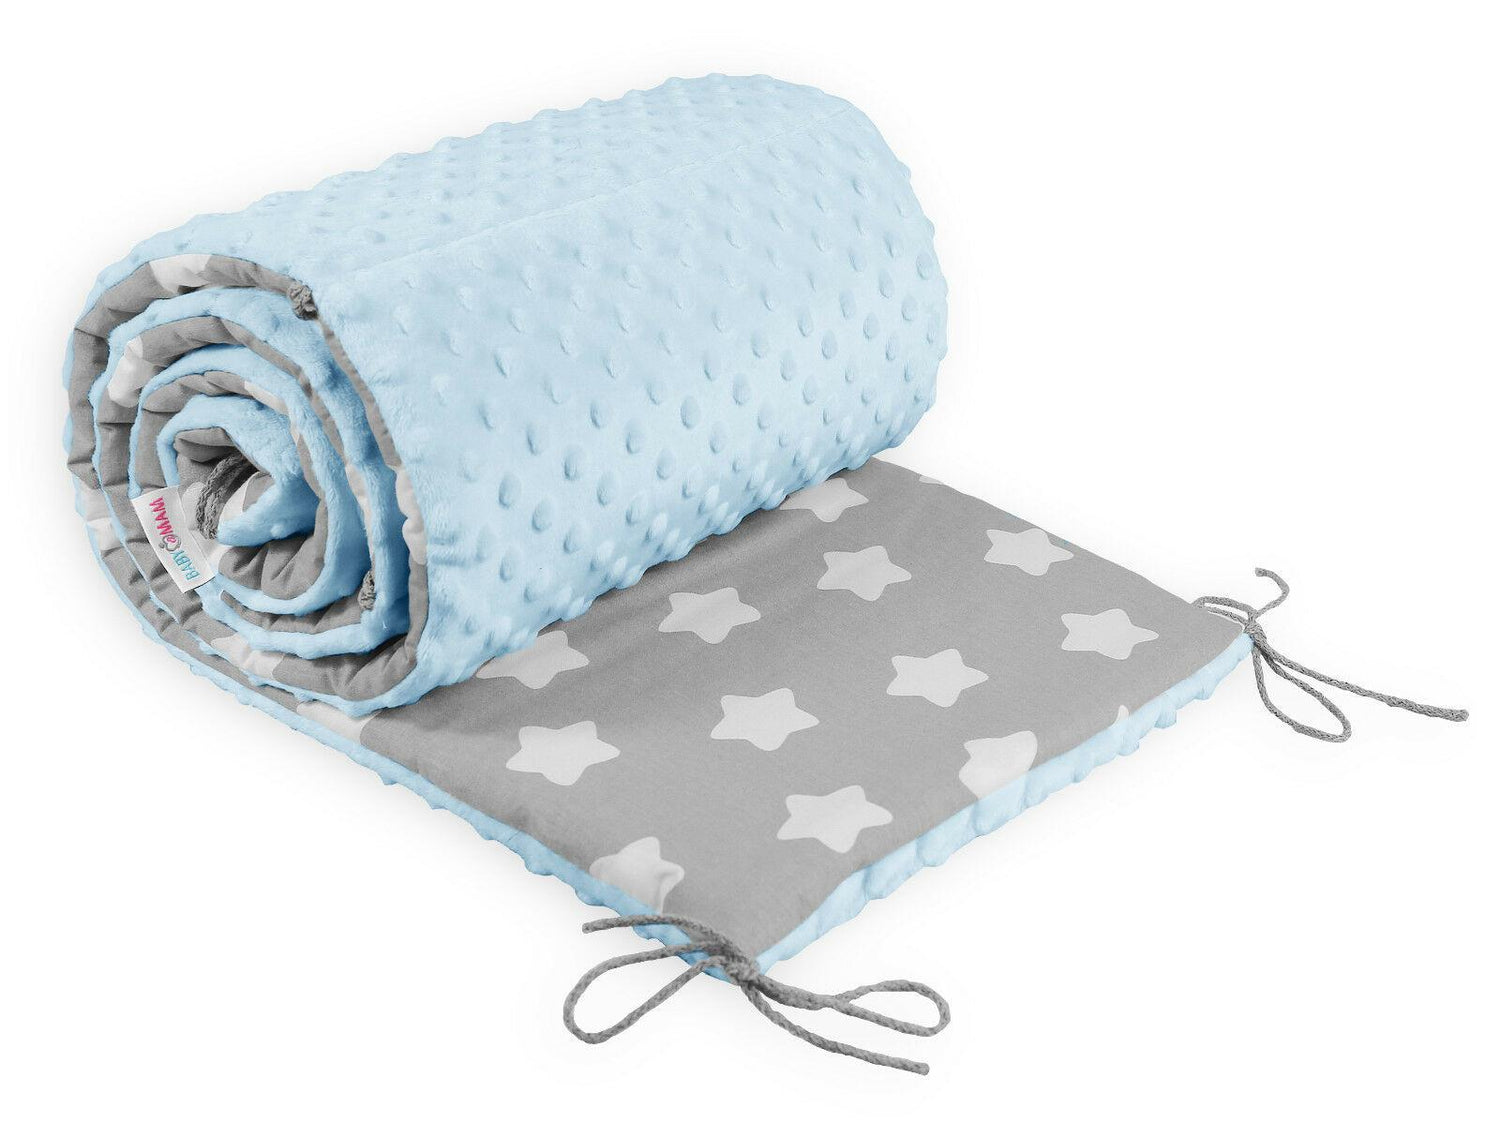 Baby dimple padded bumper nursery protection fit cot bed 140x70 190cm Blue / Big white stars on grey